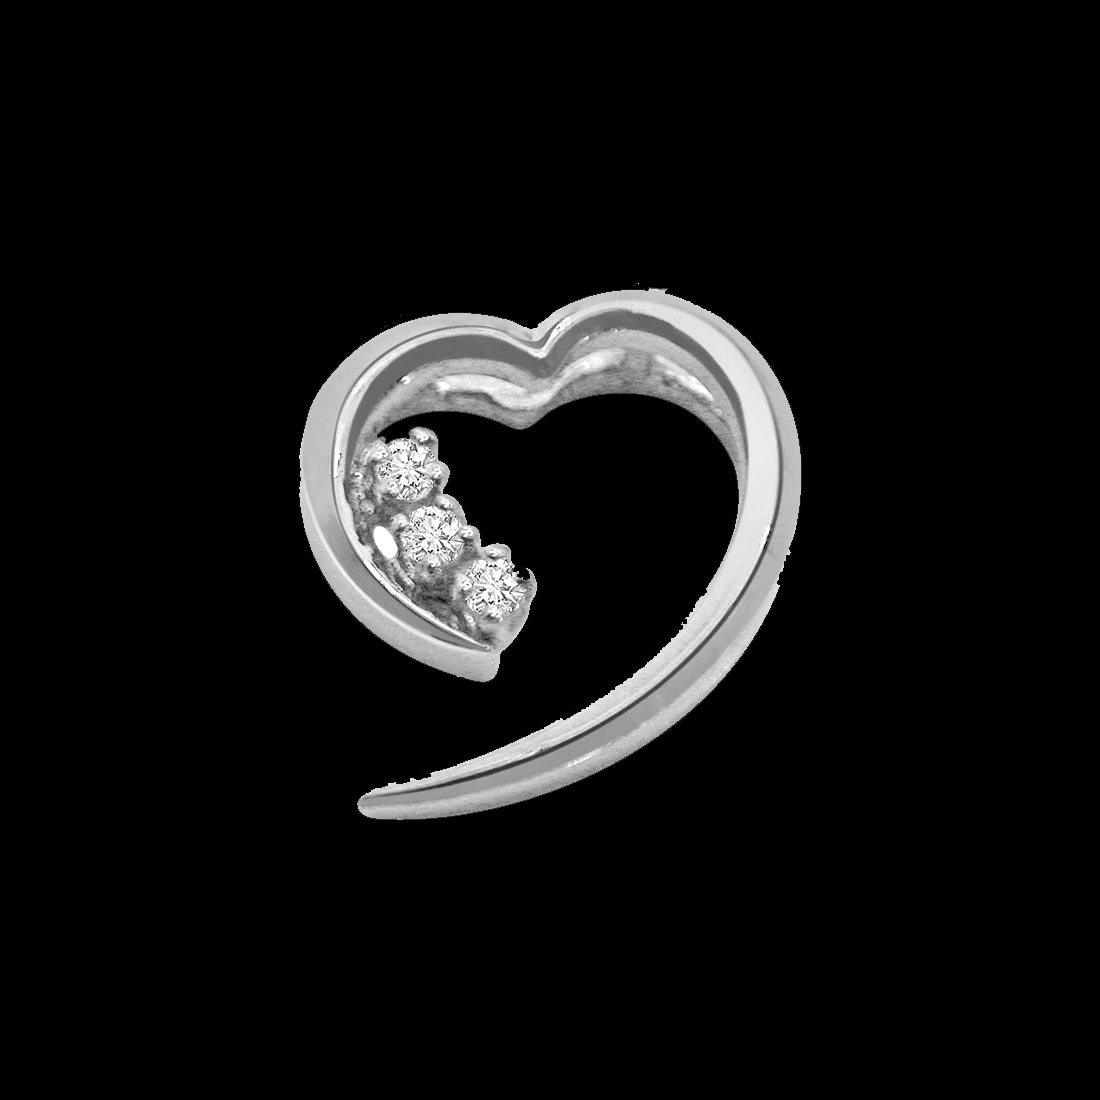 Fall in Love - Real Diamond & Sterling Silver Pendant with 18 IN Chain (SDP104)